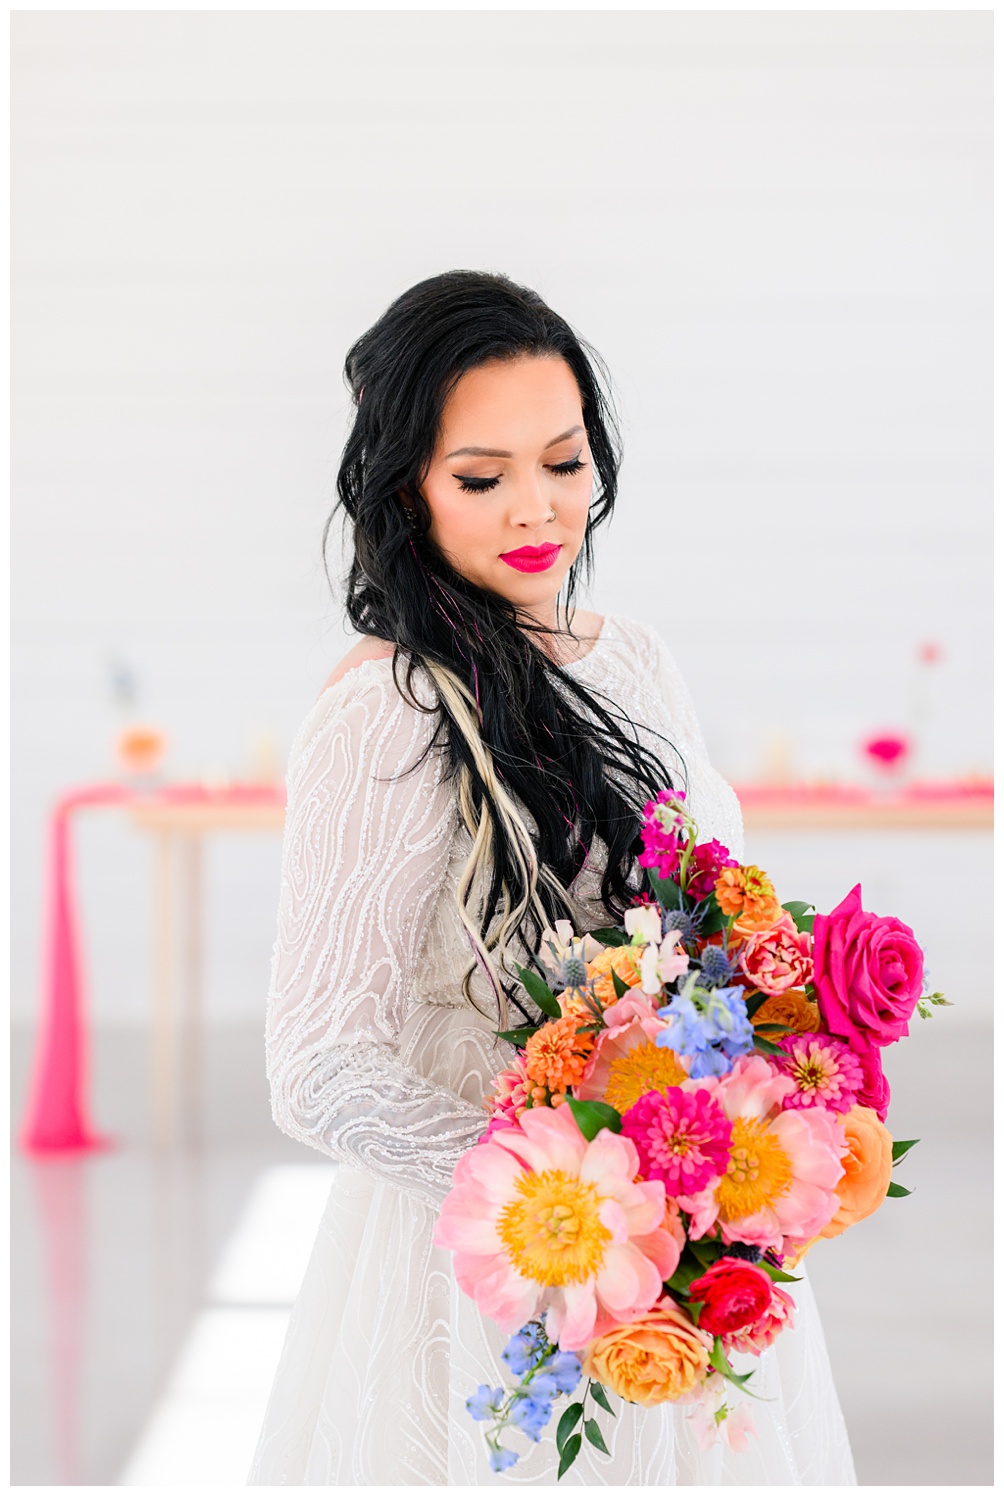 Bridal Portraits at Wish Well House